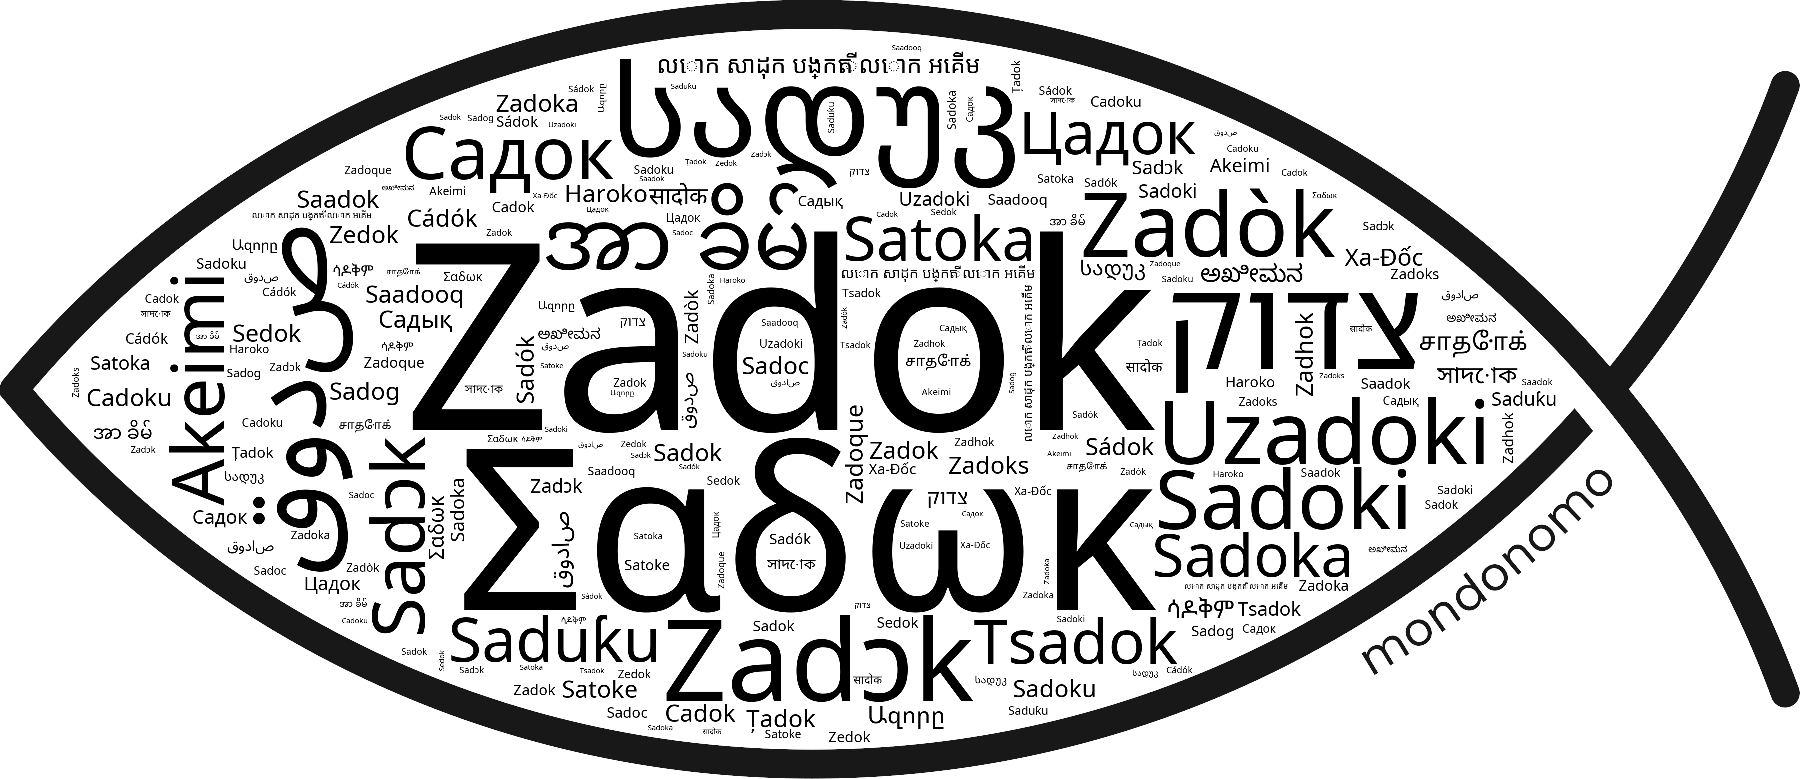 Name Zadok in the world's Bibles